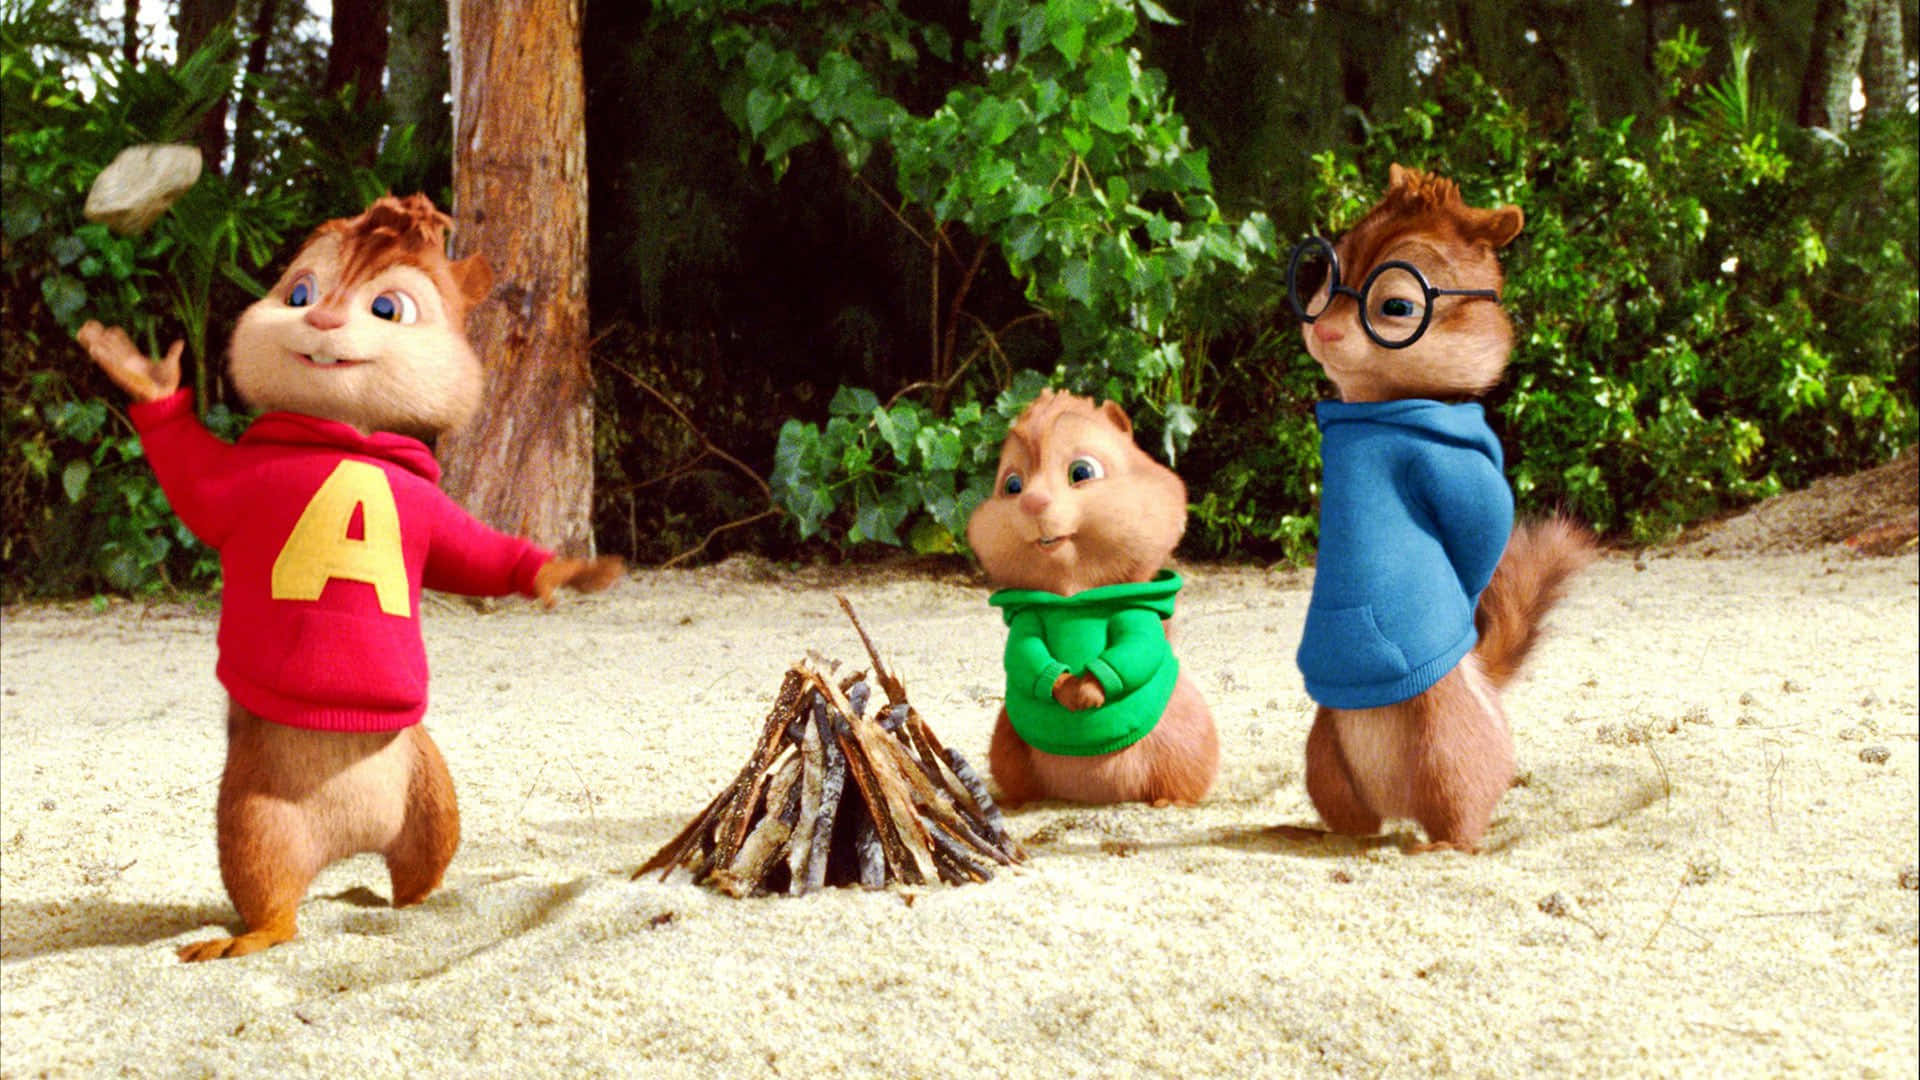 Join Alvin, Theodore and Simon of Alvin And The Chipmunks on their funny adventures!